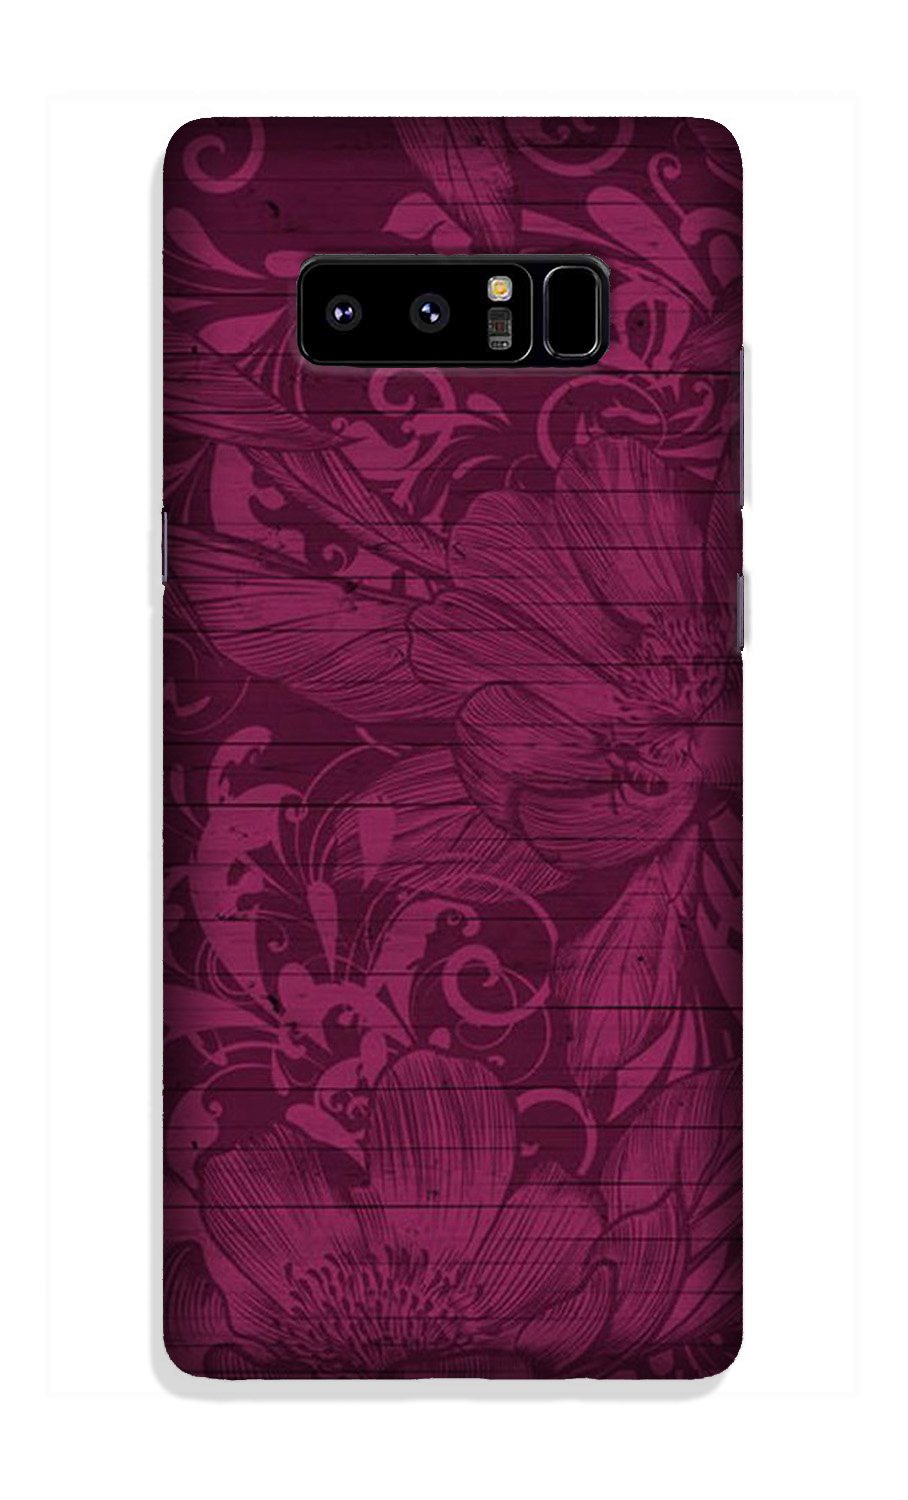 Purple Backround Case for Galaxy Note 8